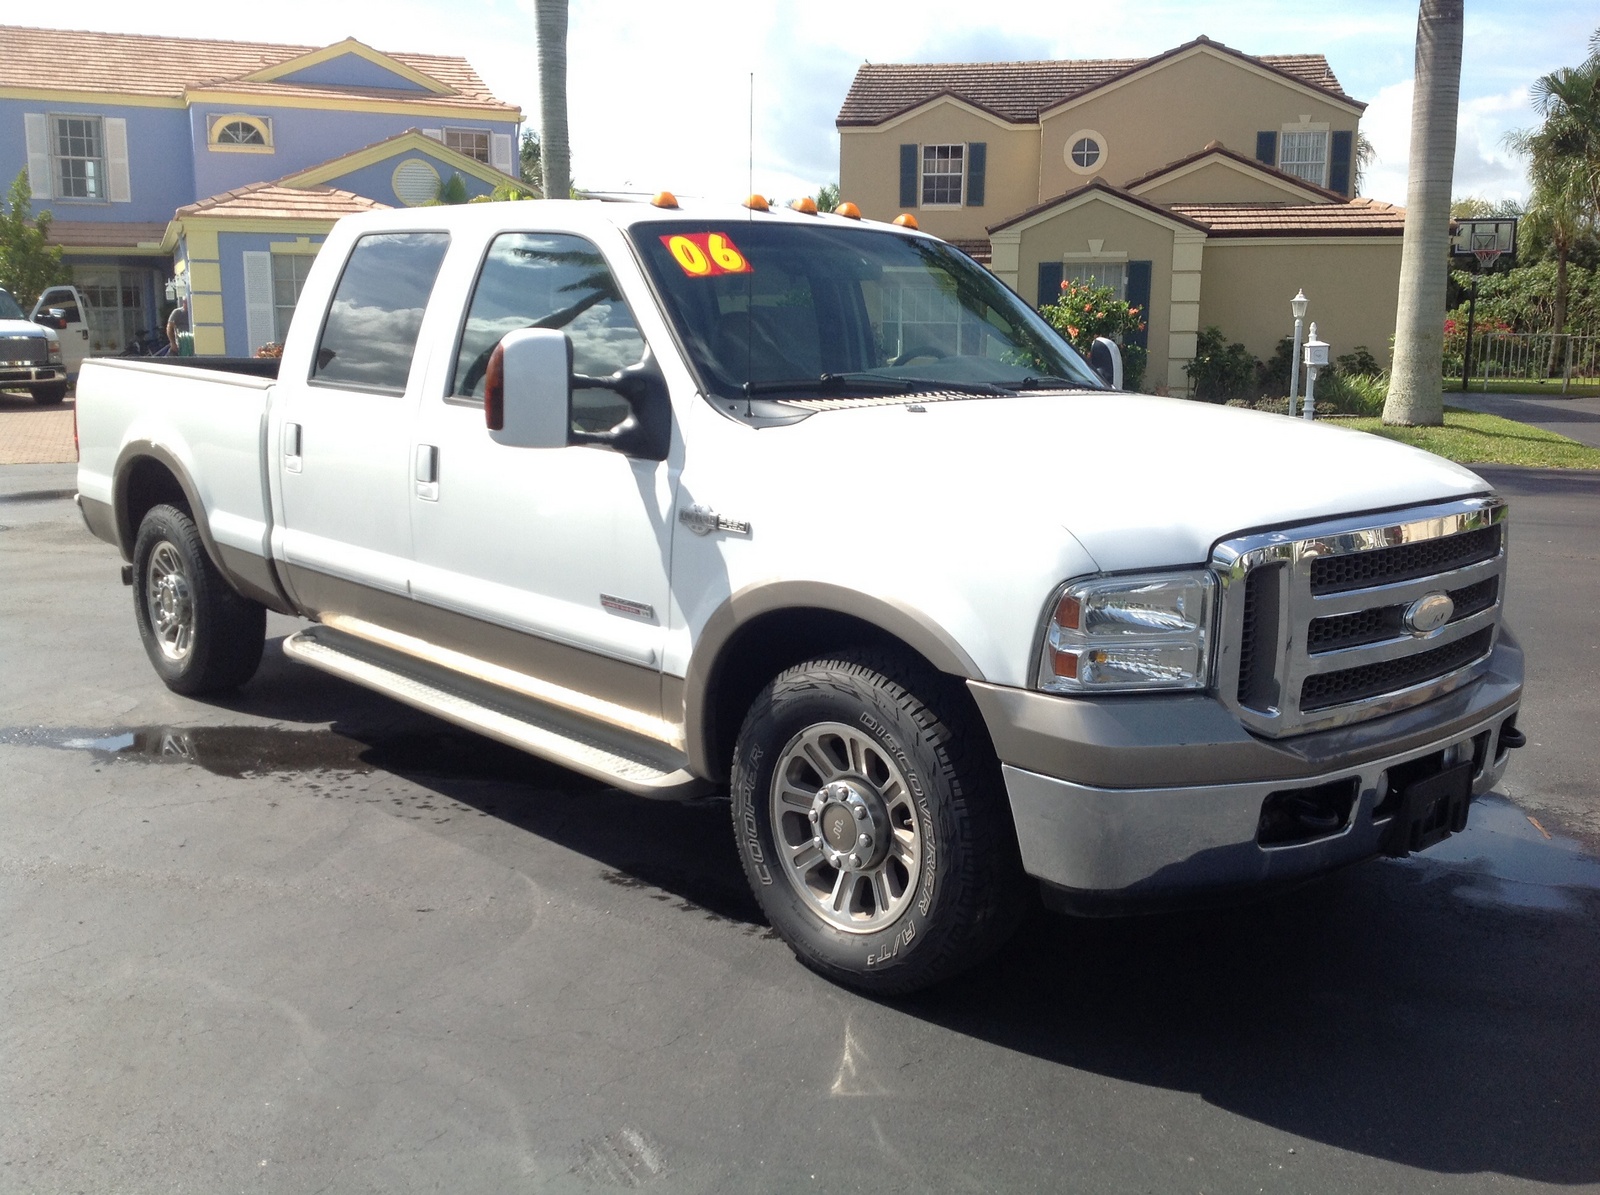 2006 Ford f250 lariat reviews #1